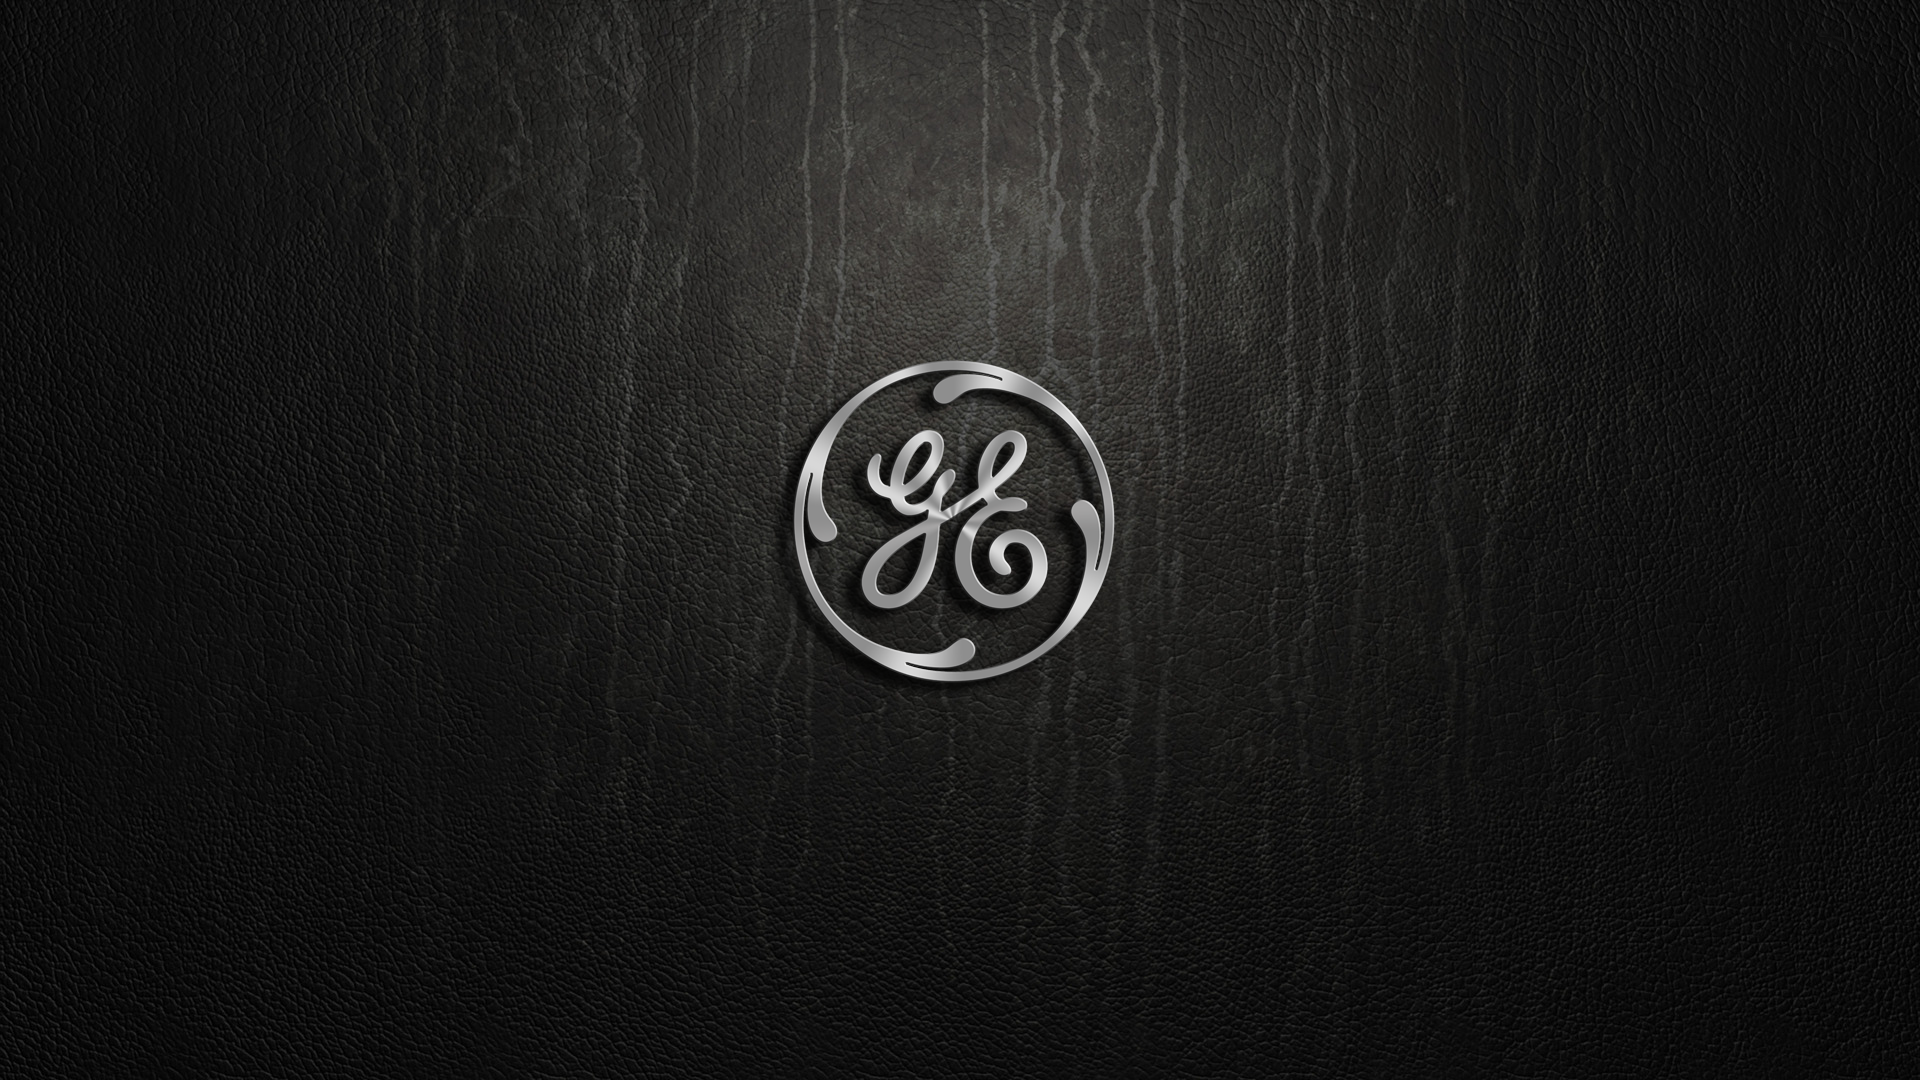 Products General Electric HD Wallpaper | Background Image